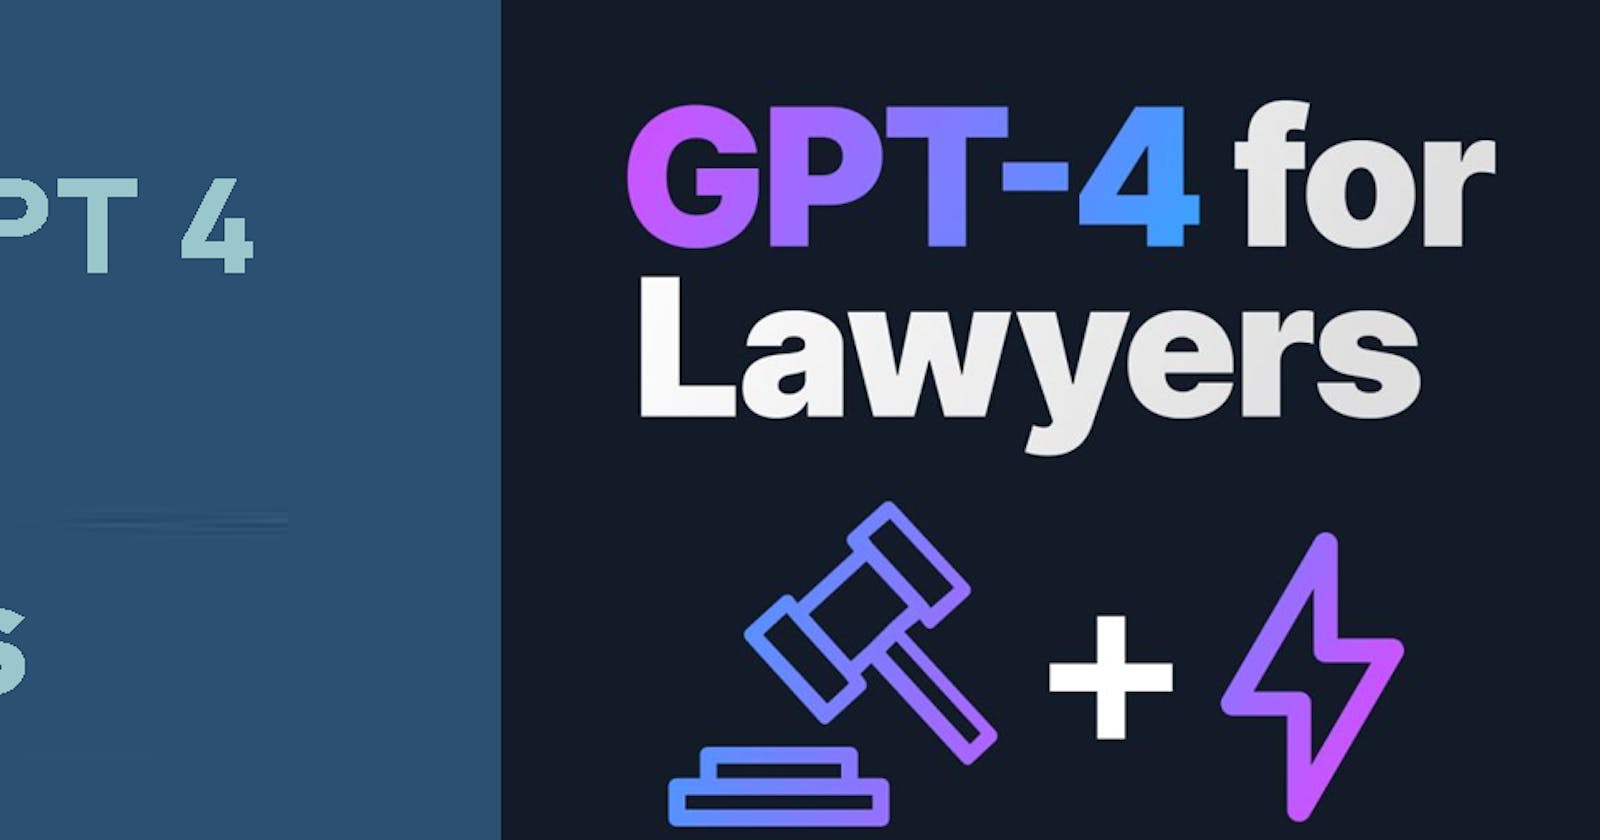 YES, There Is A Free GPT Platform For Lawyers, Legal Documents, Legal Research, Litigation and Legal Case Drafting.